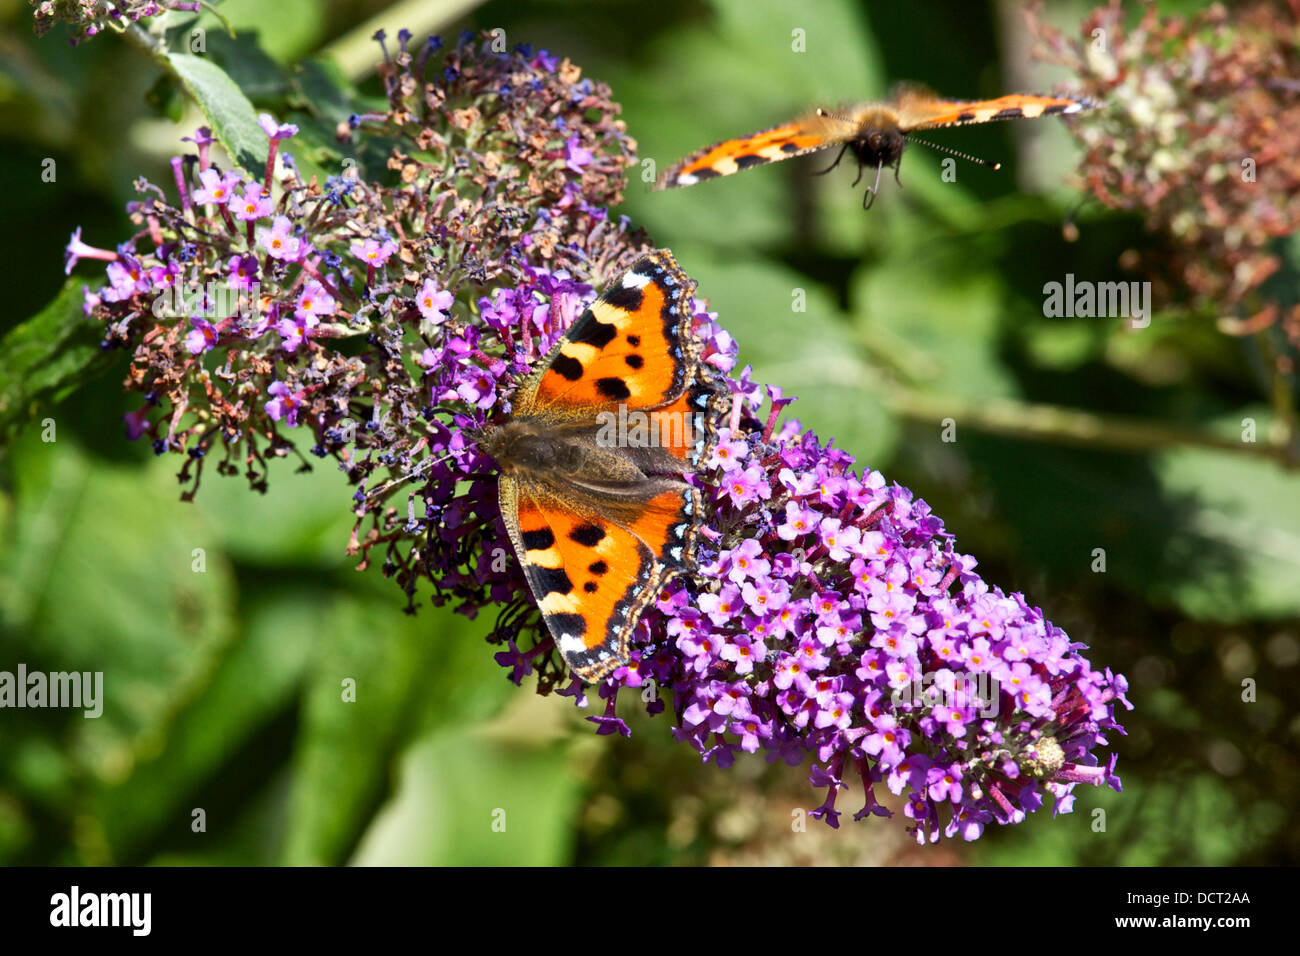 Faversham Kent UK - 21 August 2013 : The continuing good weather in the south east proves a blessing for the butterflies. The Small Tortoiseshell (Aglais urticae) has been on the decline in the UK in recent years. One is seen here on a Buddleia with another flying in. Stock Photo